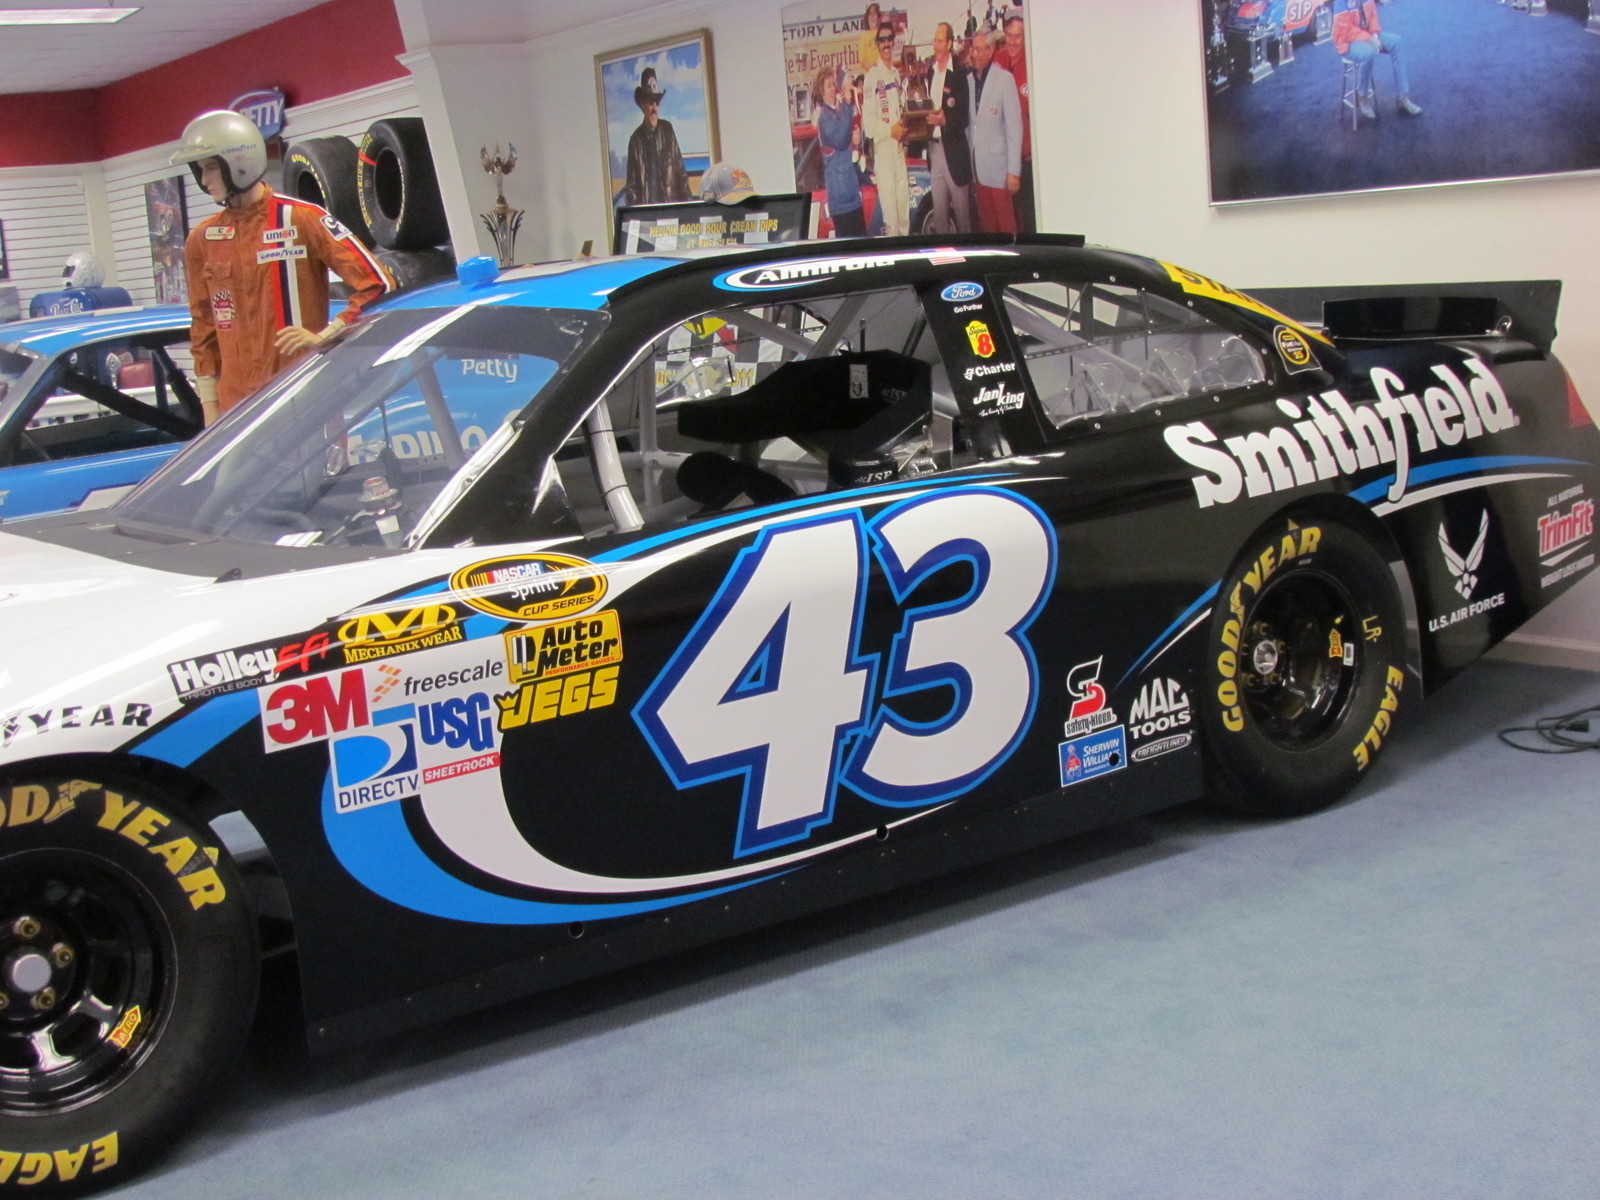 The 2012 #43 car as it sits in the Richard Petty Museum of Randleman, North Carolina. Photo courtesy of Larry Laney and Bonnie Davis; Richard Pettty Museum staff